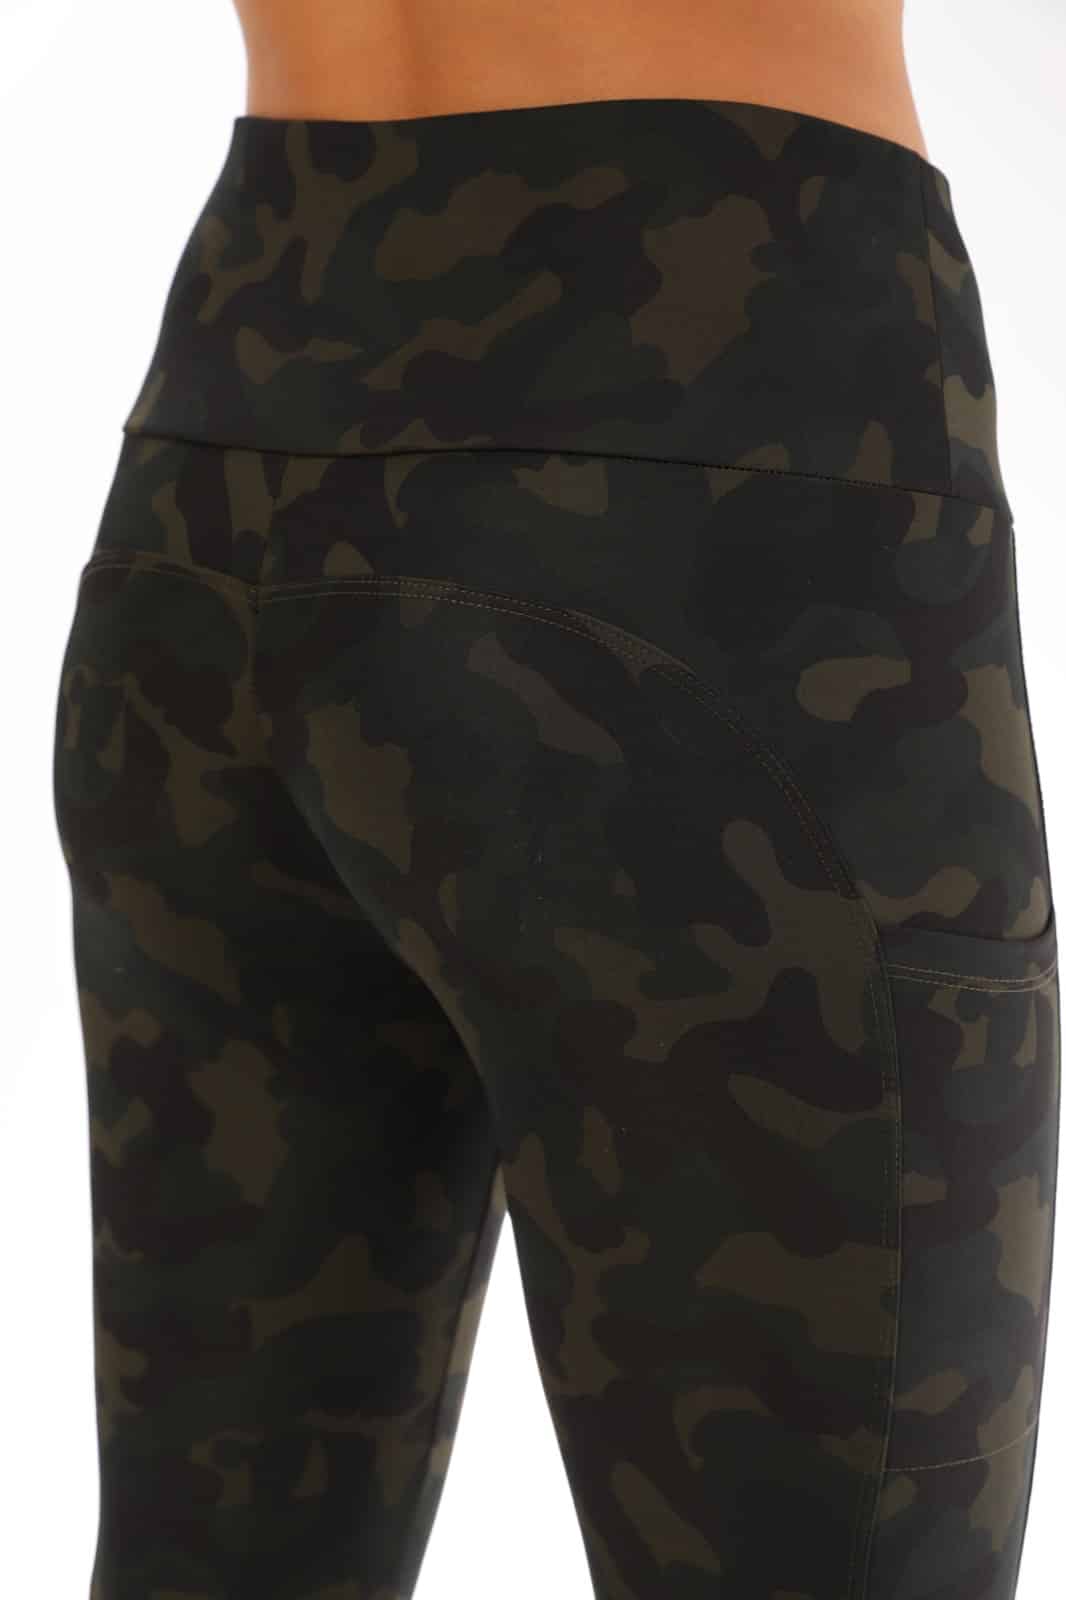 Alo - Green Camouflage Print Activewear Leggings Unknown